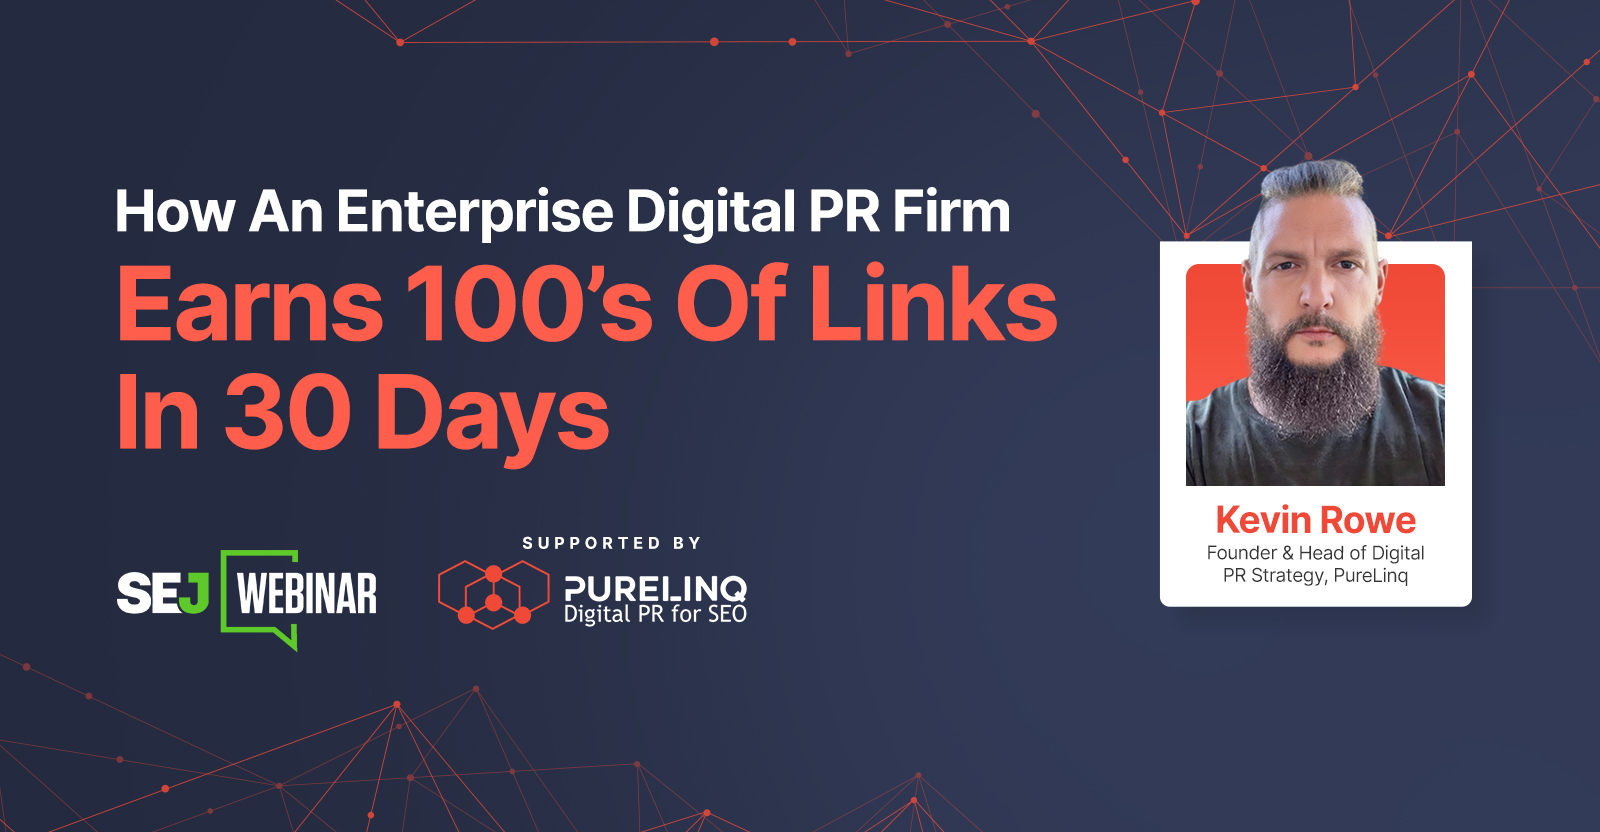 The Power of Press: Scalable Strategies To Earn 100’s Of Digital PR Links